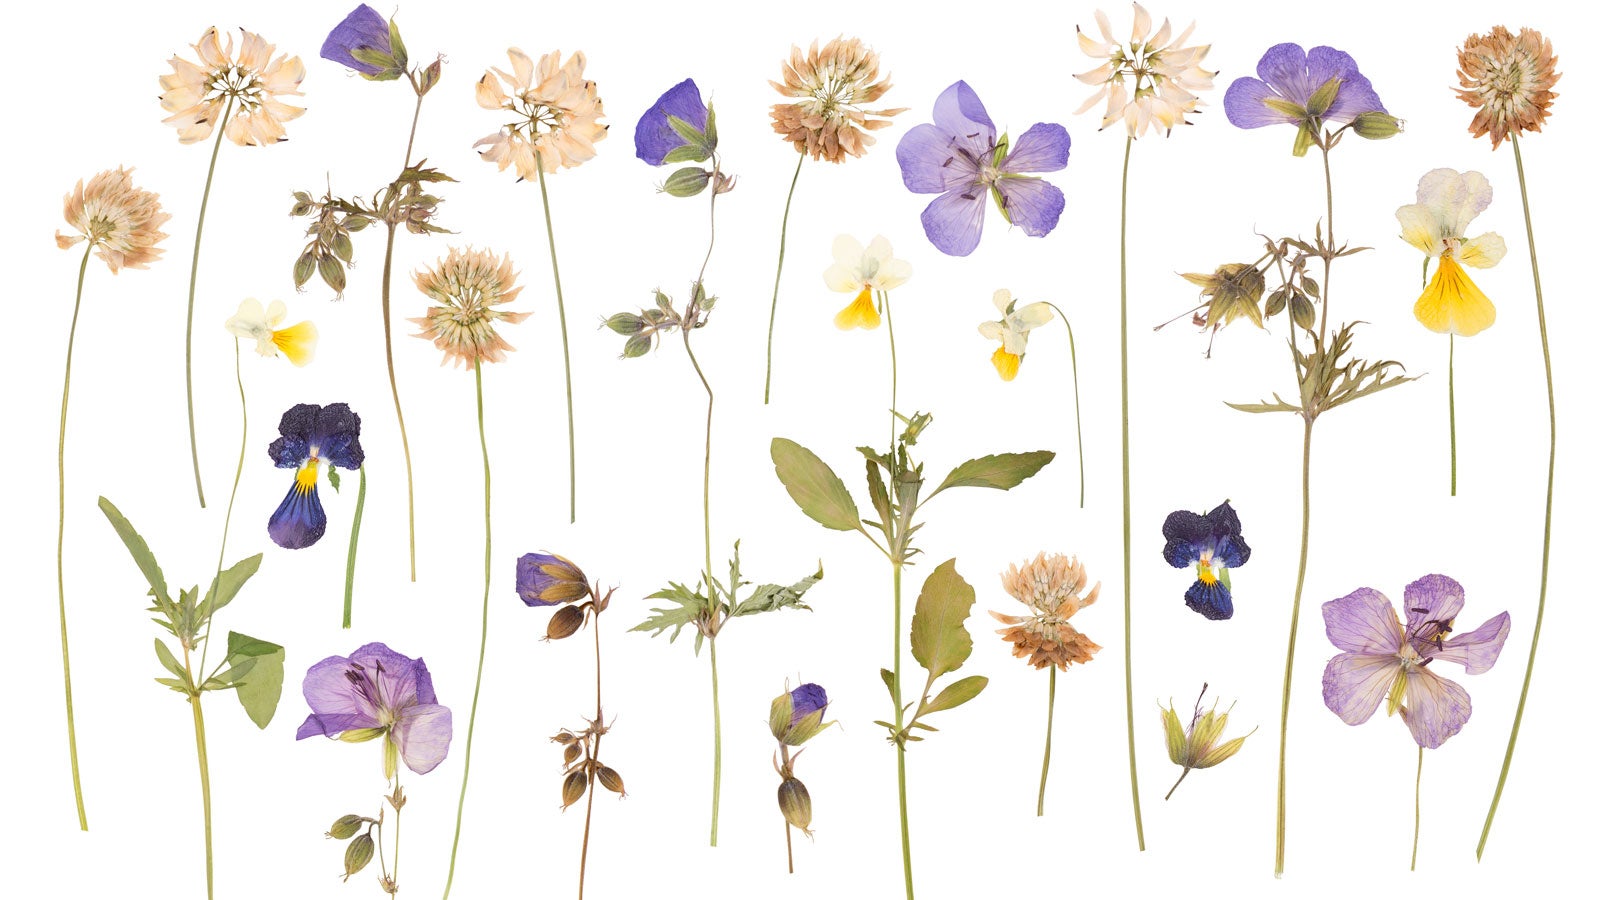 An assortment of pressed flowers against a white background